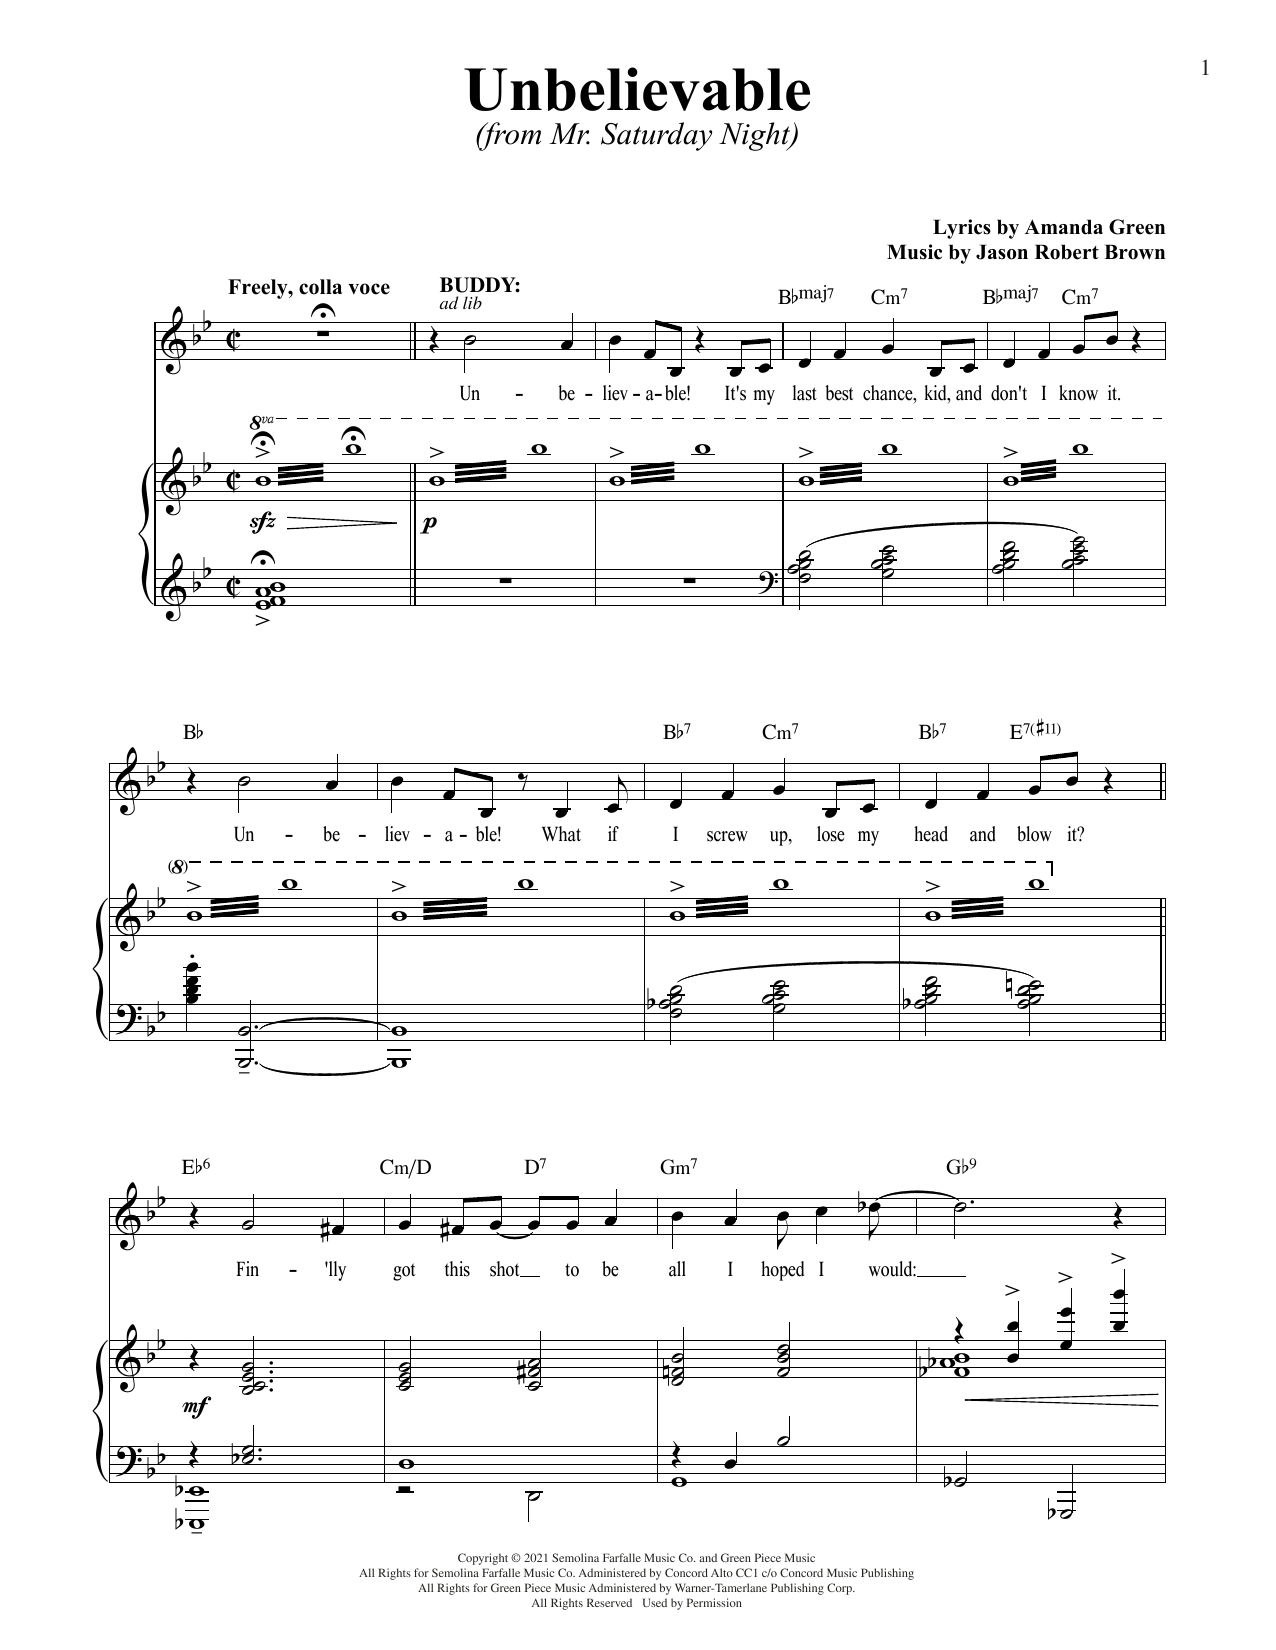 Jason Robert Brown and Amanda Green Unbelievable (from Mr. Saturday Night) sheet music notes printable PDF score